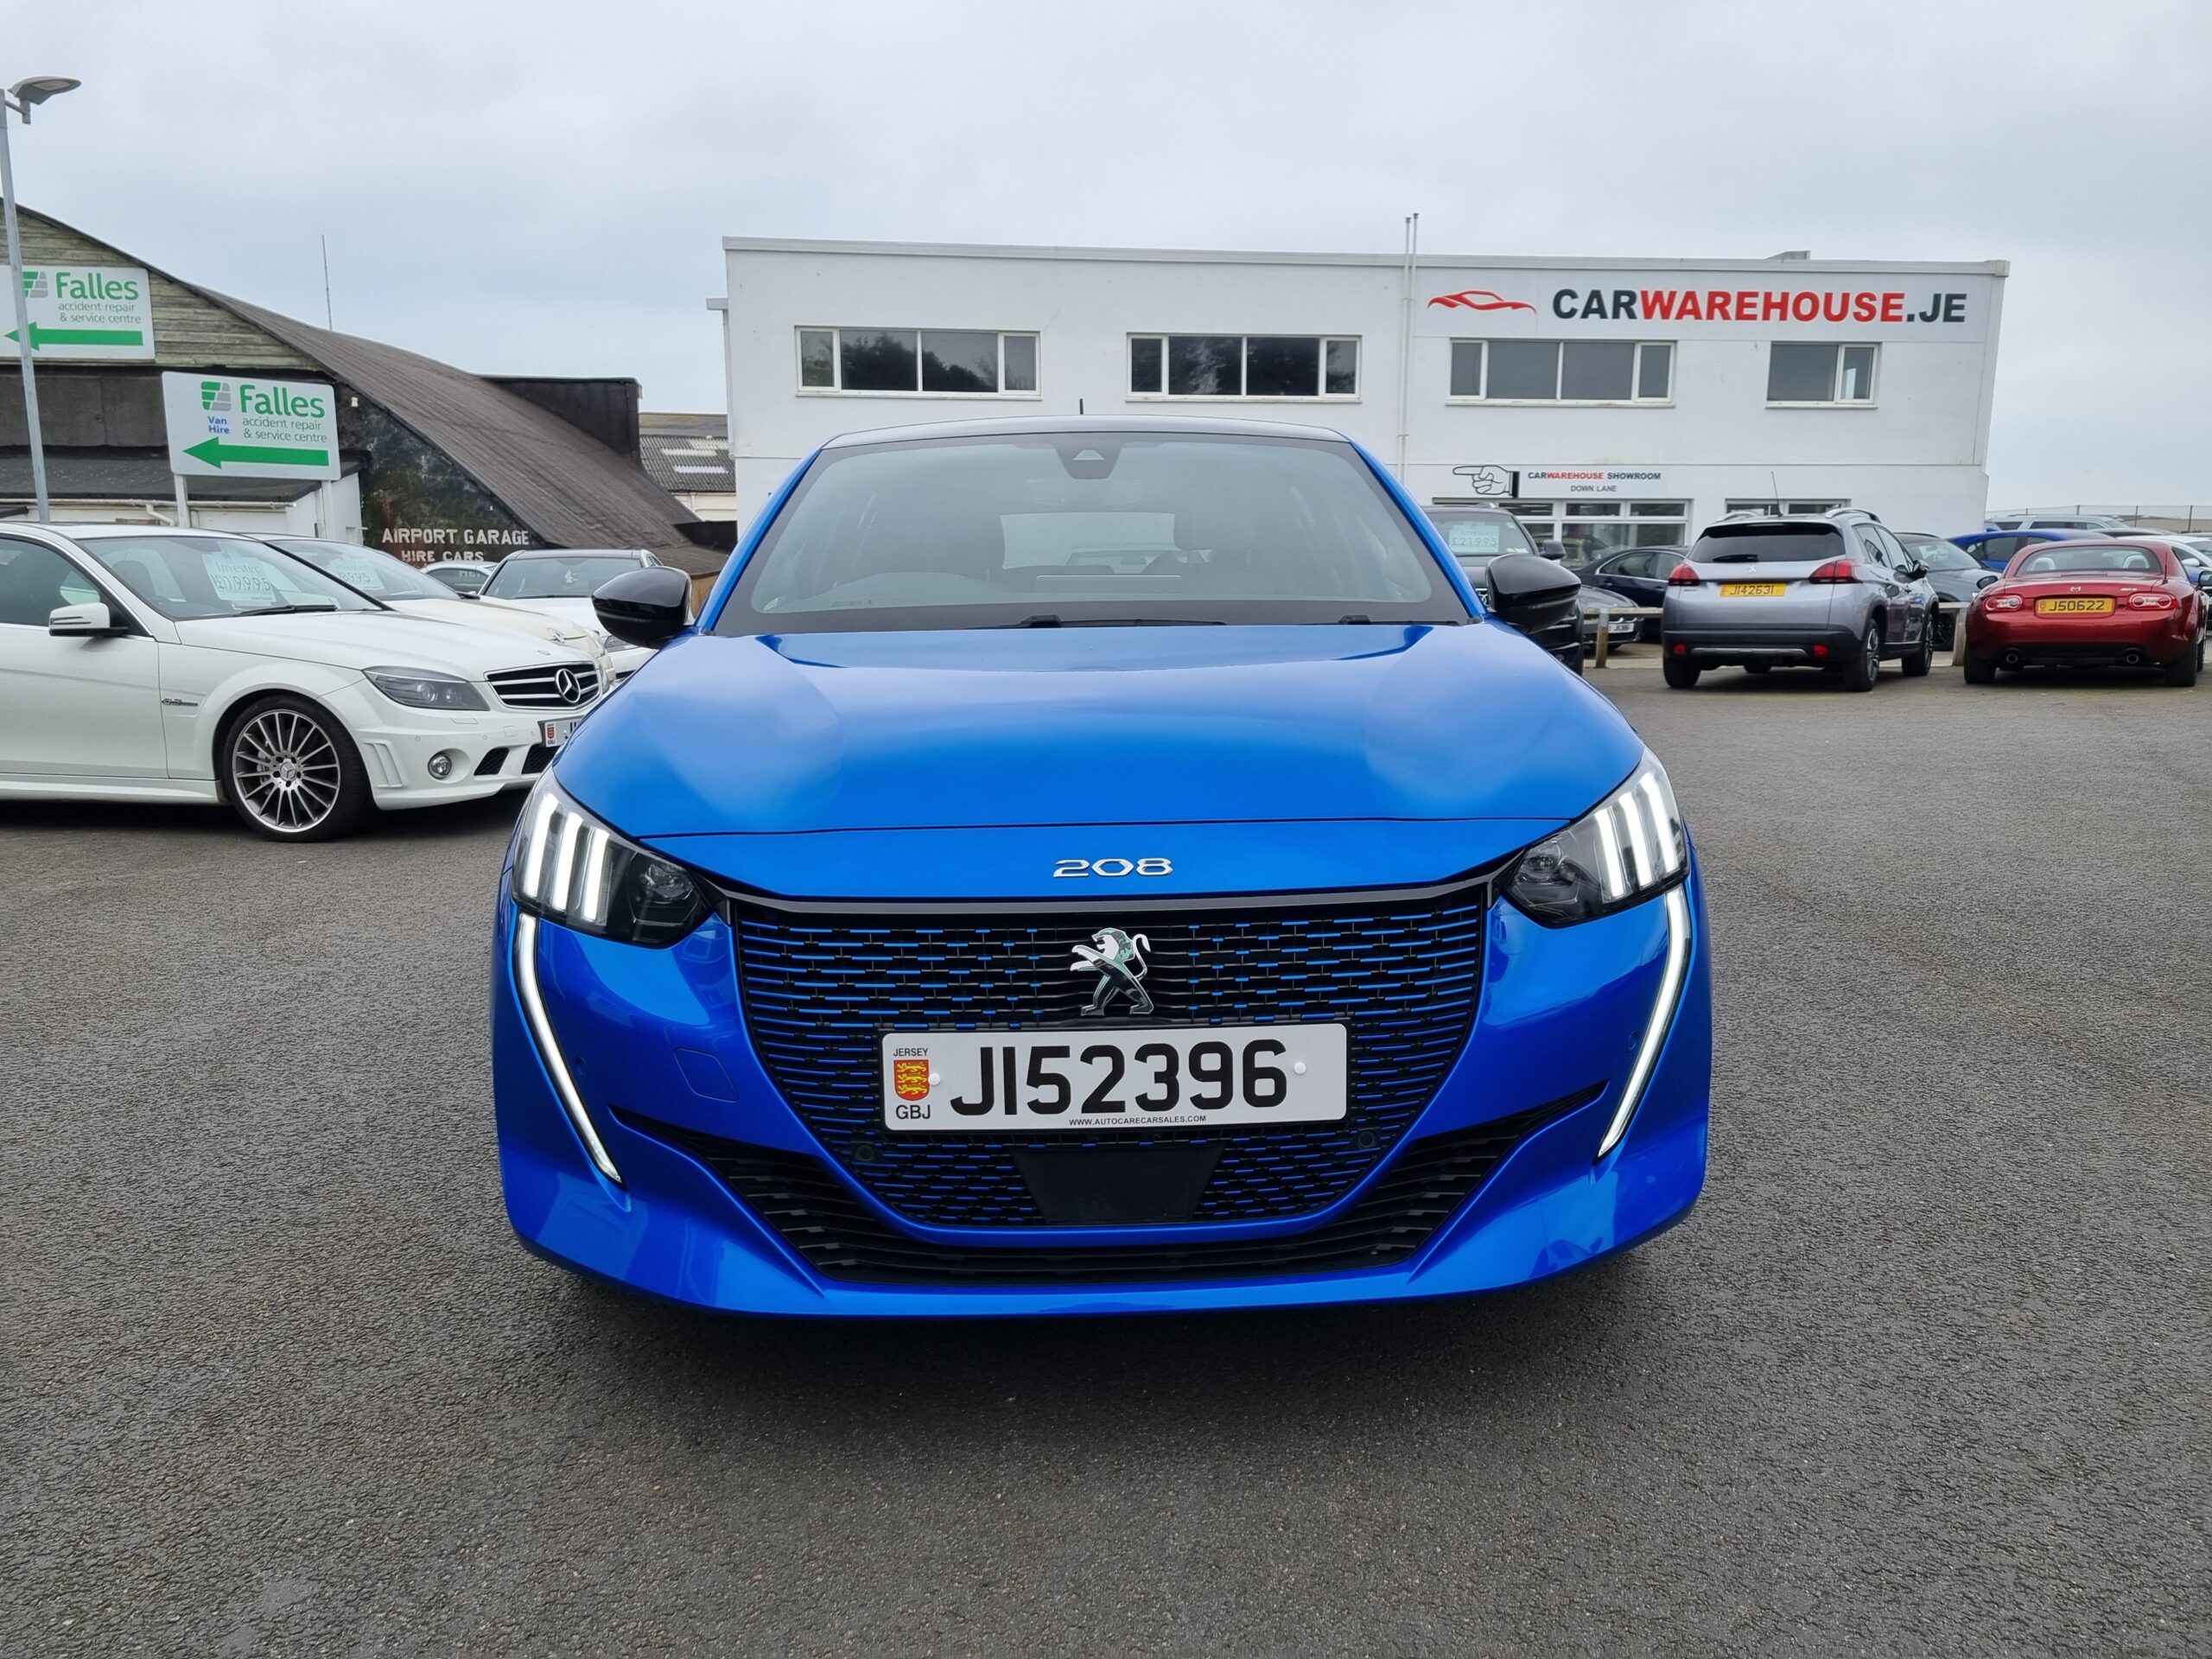 Ev Grant You Pay 154952021 Peugeot E 208 136bhp Gt Line 5drfully Electriccost New 33920 Now Only 18995 11